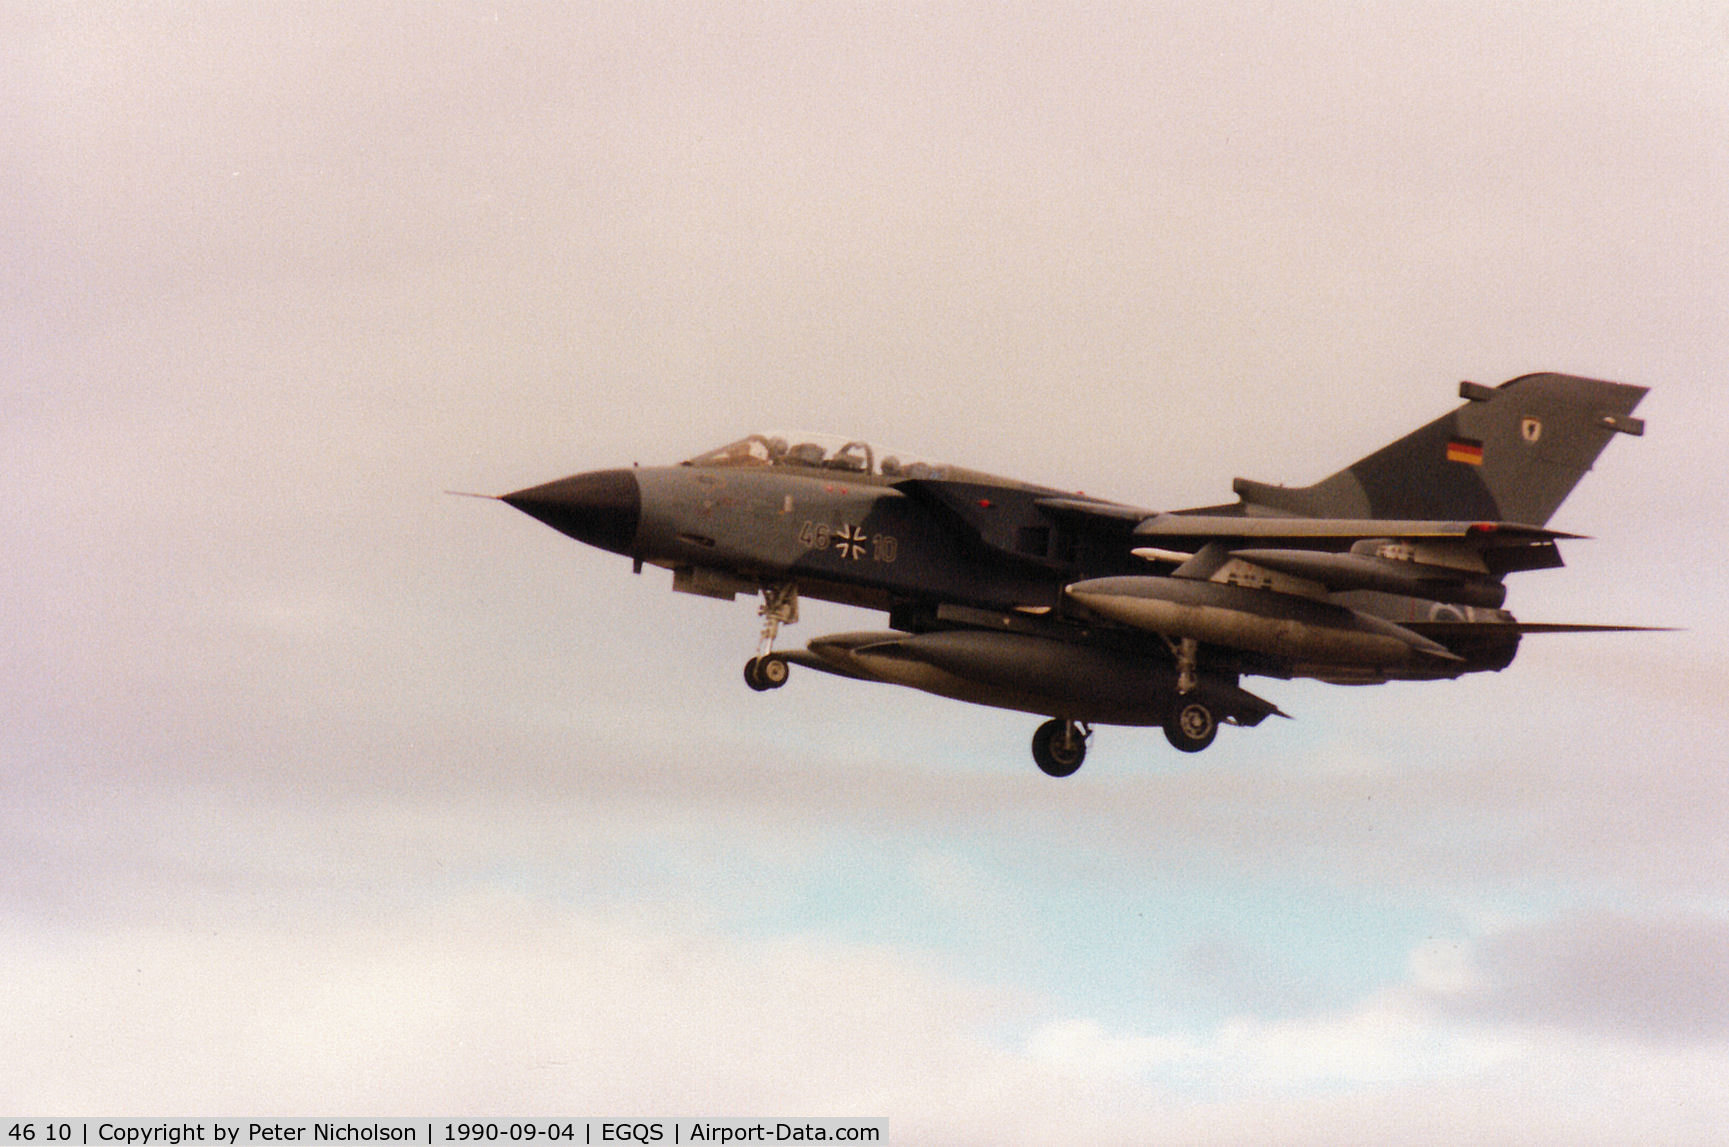 46 10, Panavia Tornado IDS C/N 767/GS243/4310, Tornado IDS of Marineflieger MFG-1 on final approach to Runway 23 at RAF Lossiemouth in the Summer of 1990.